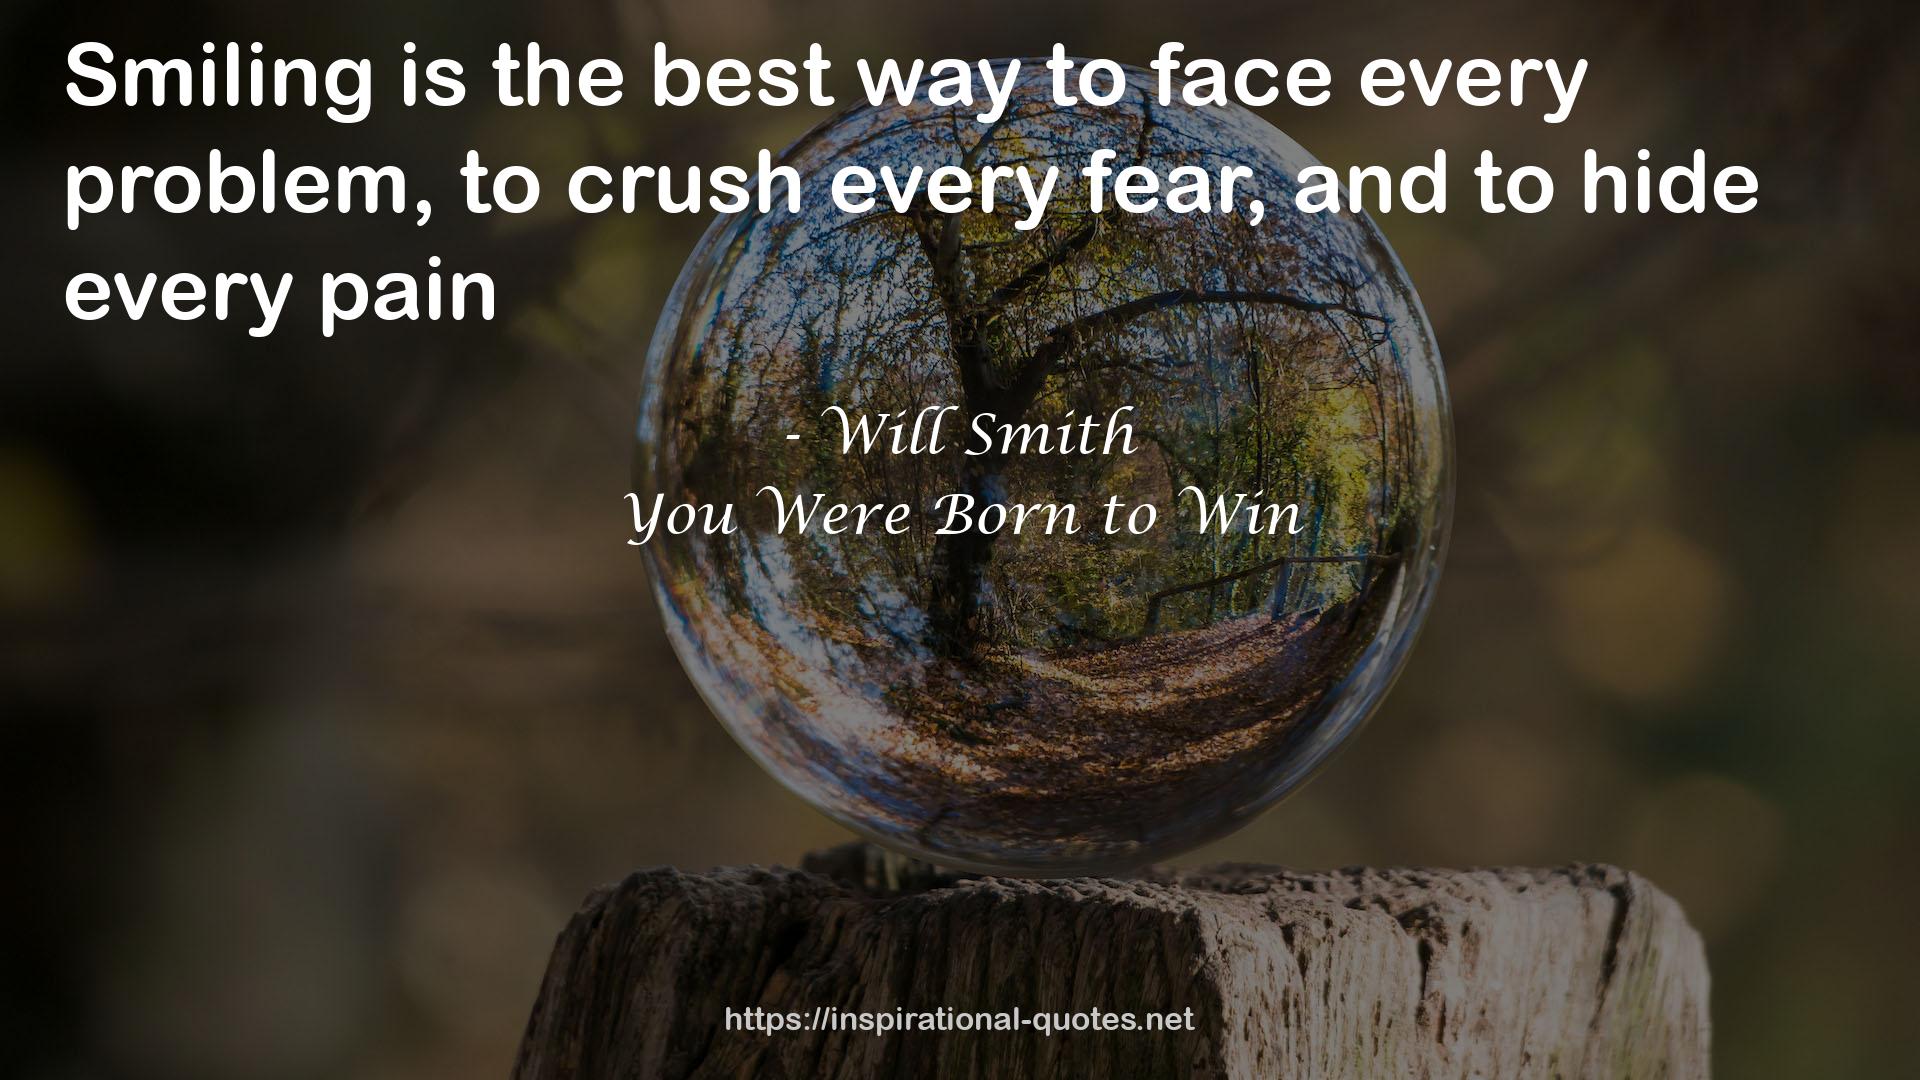 You Were Born to Win QUOTES